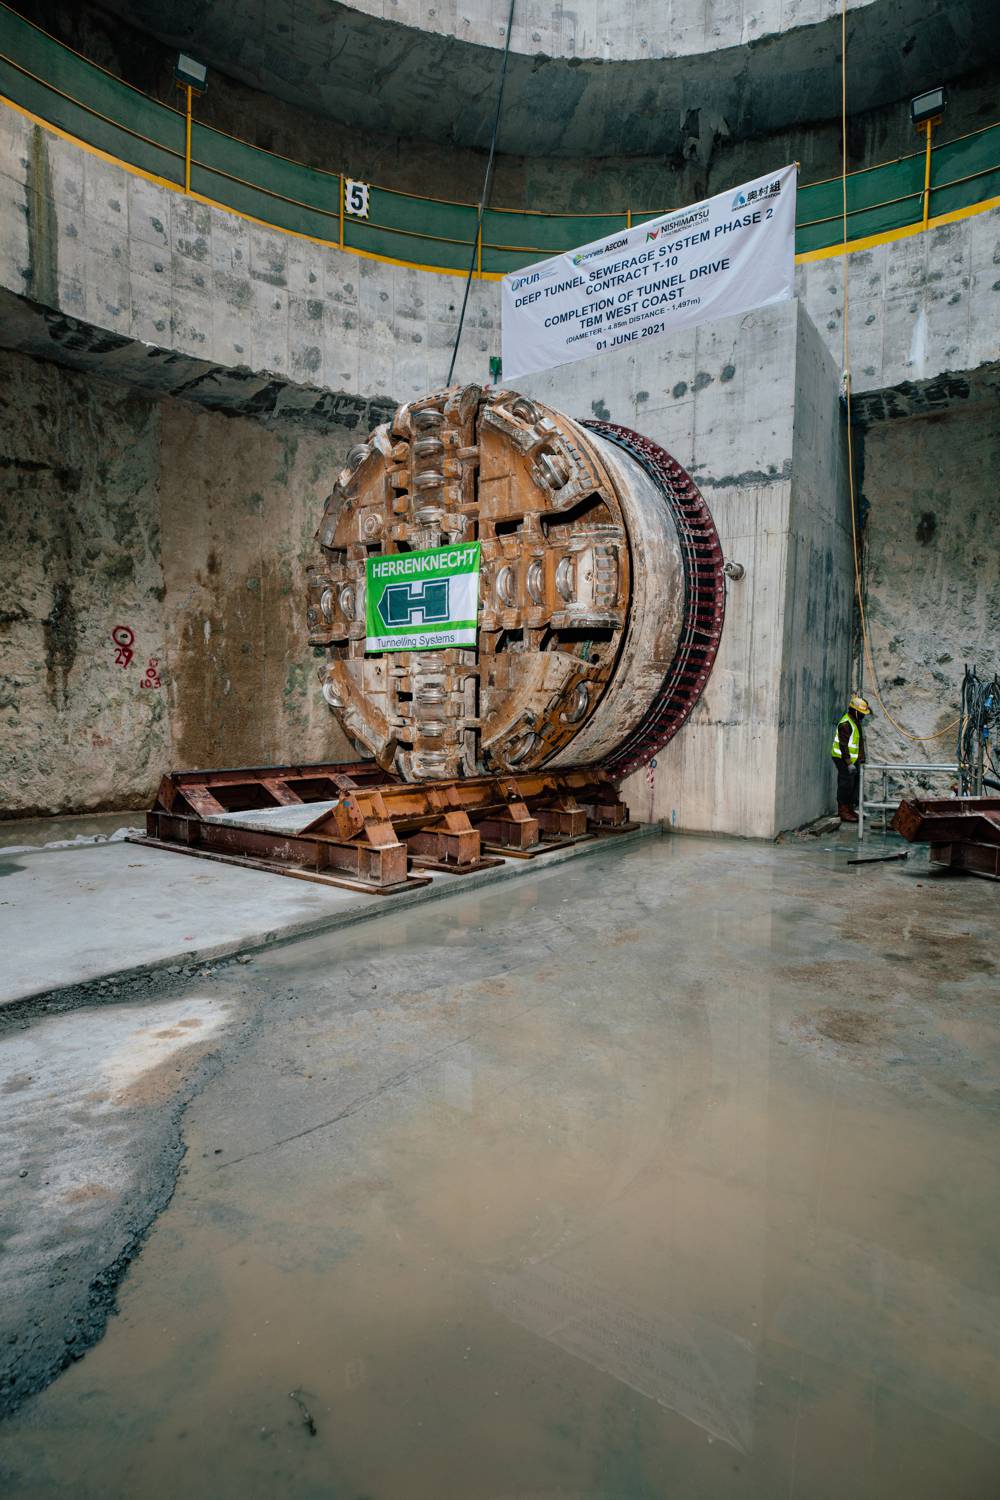 Herrenknecht is the sole supplier of mechanized tunnelling technology for DTSS Phase 2.